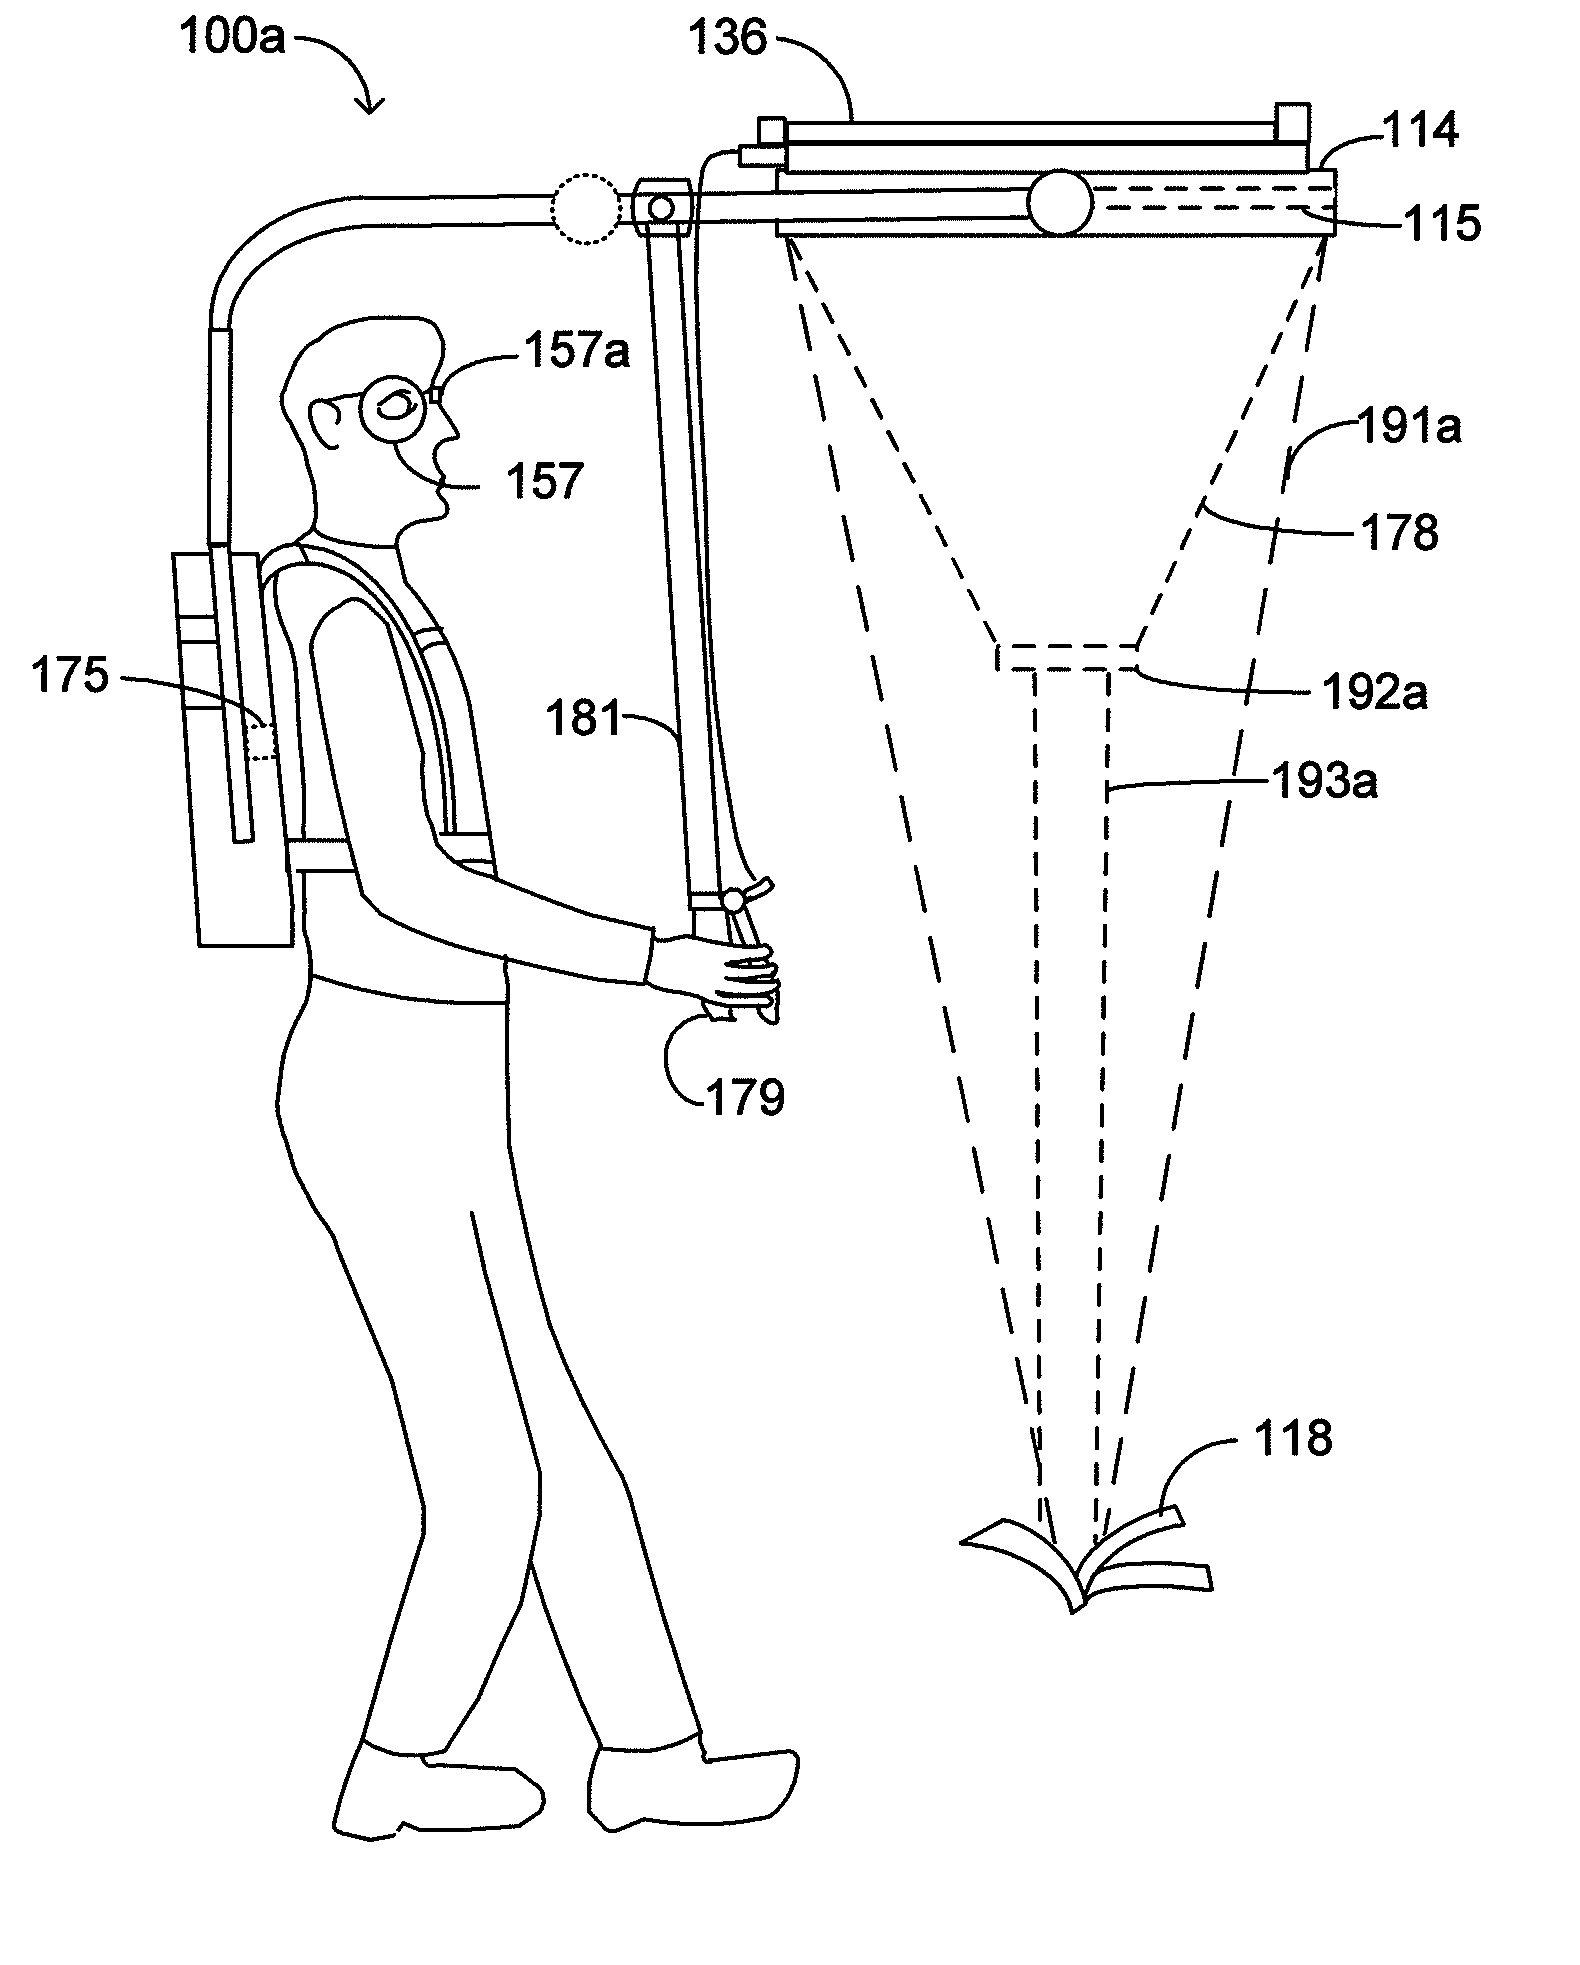 Method and Apparatus for Controlling Weeds with Solar Energy